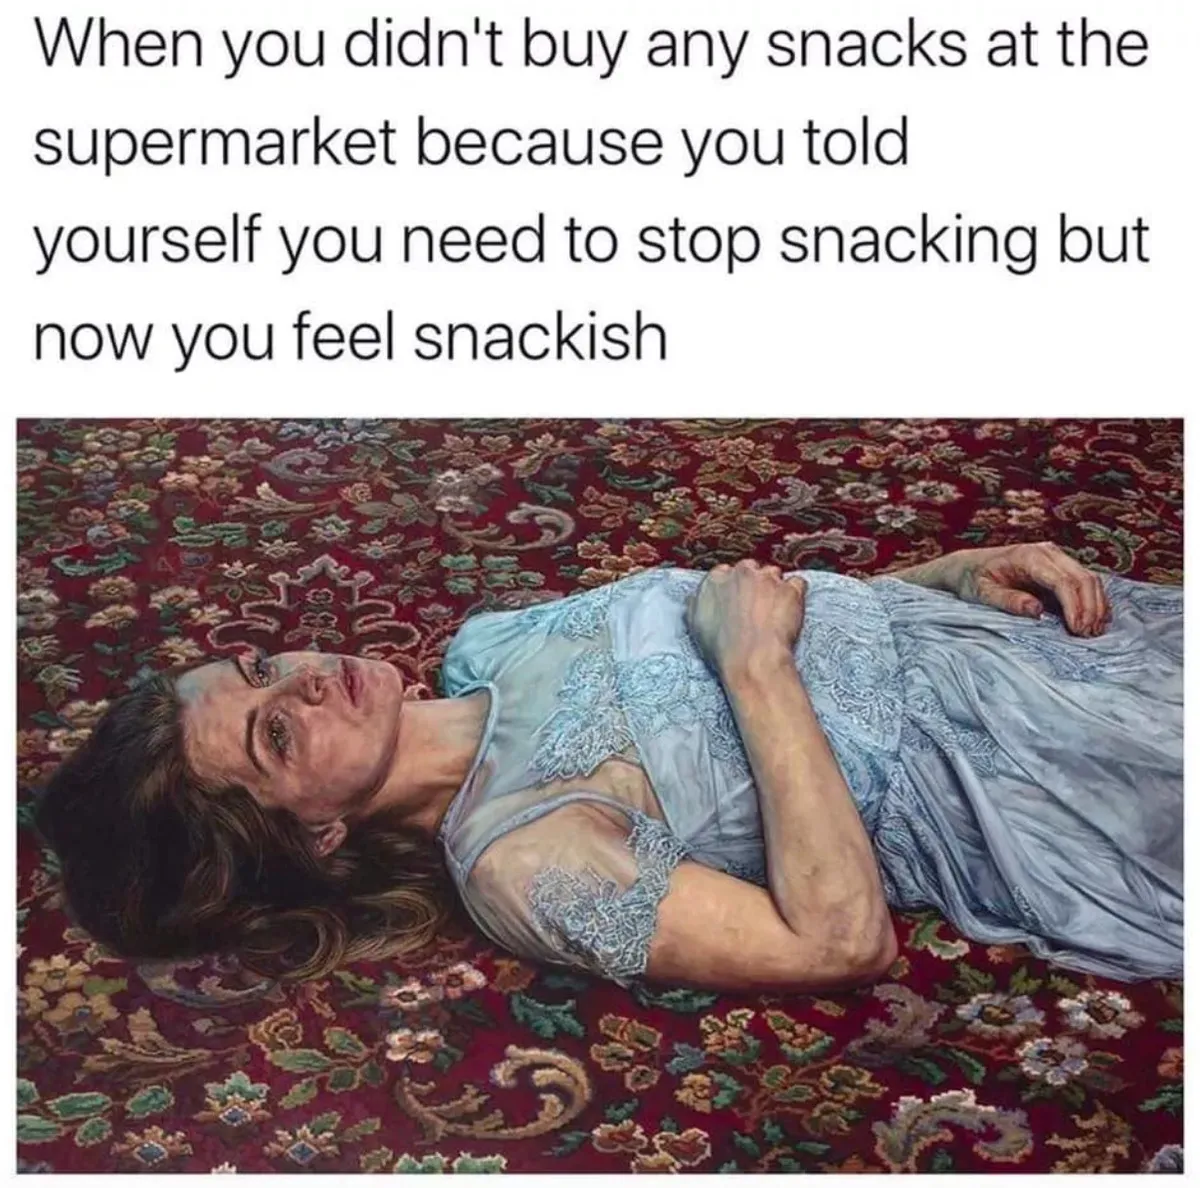 girl lying on floor captioned: when you didn't guy any snacks at the supermarket because you told yourself you need to stop snacking but now you feel snackish